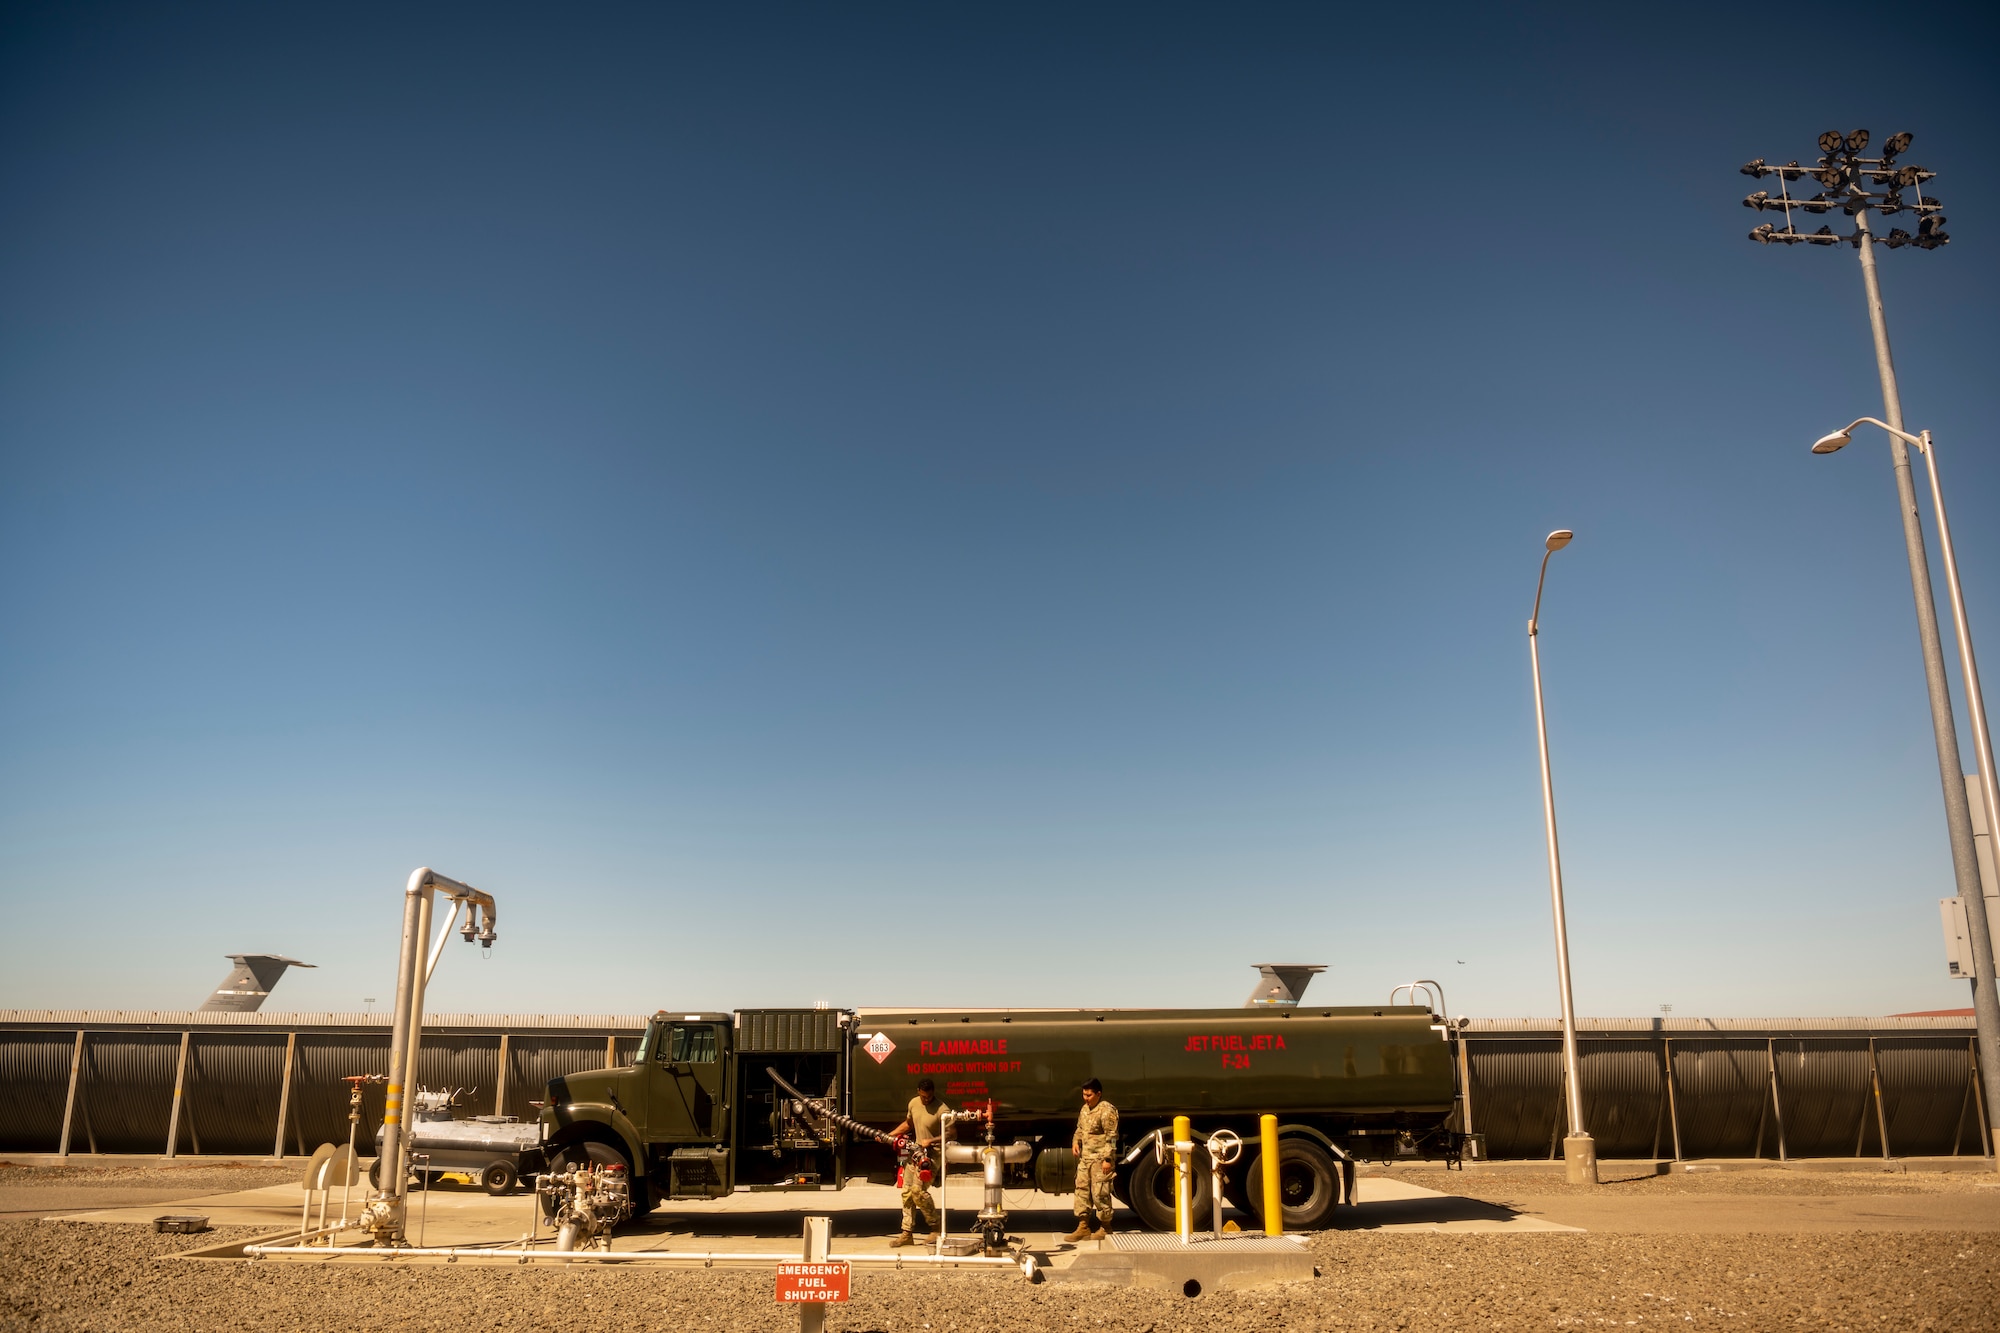 a green truck with a massive tank on the back, and two men in front of the truck move equipment on the truck to prepare the truck to transfer all of its fuel.